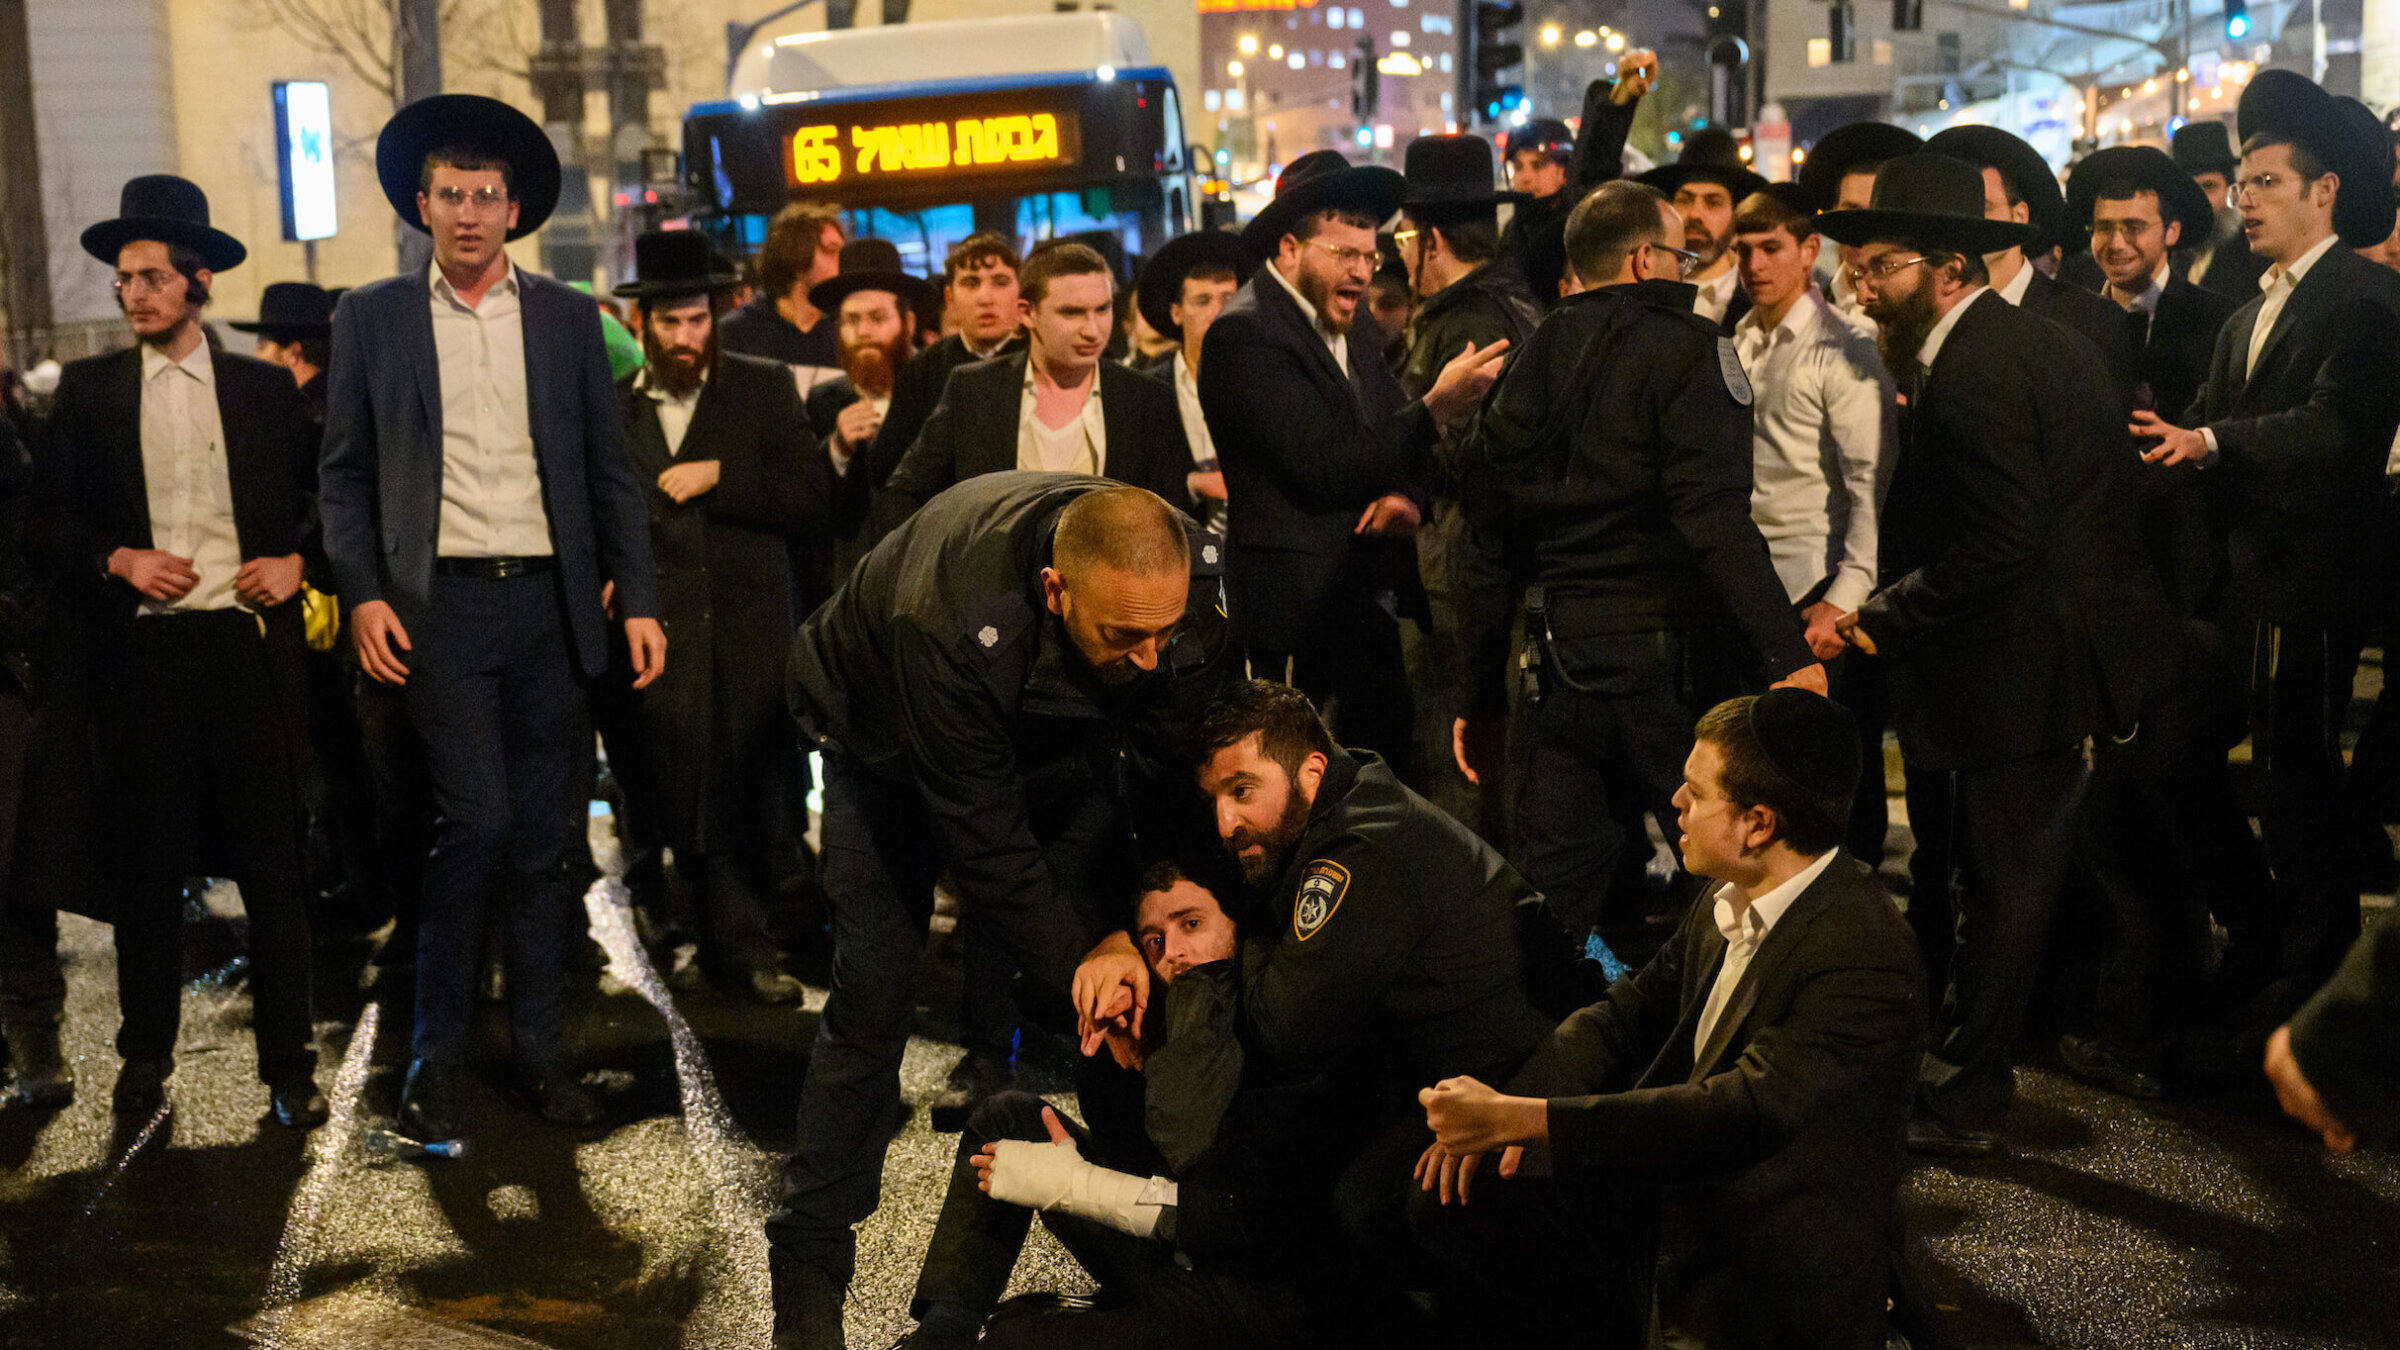 Haredi Jewish boys and men clashed with police in March while protesting against the expiration of a law preventing them from being drafted into the IDF.